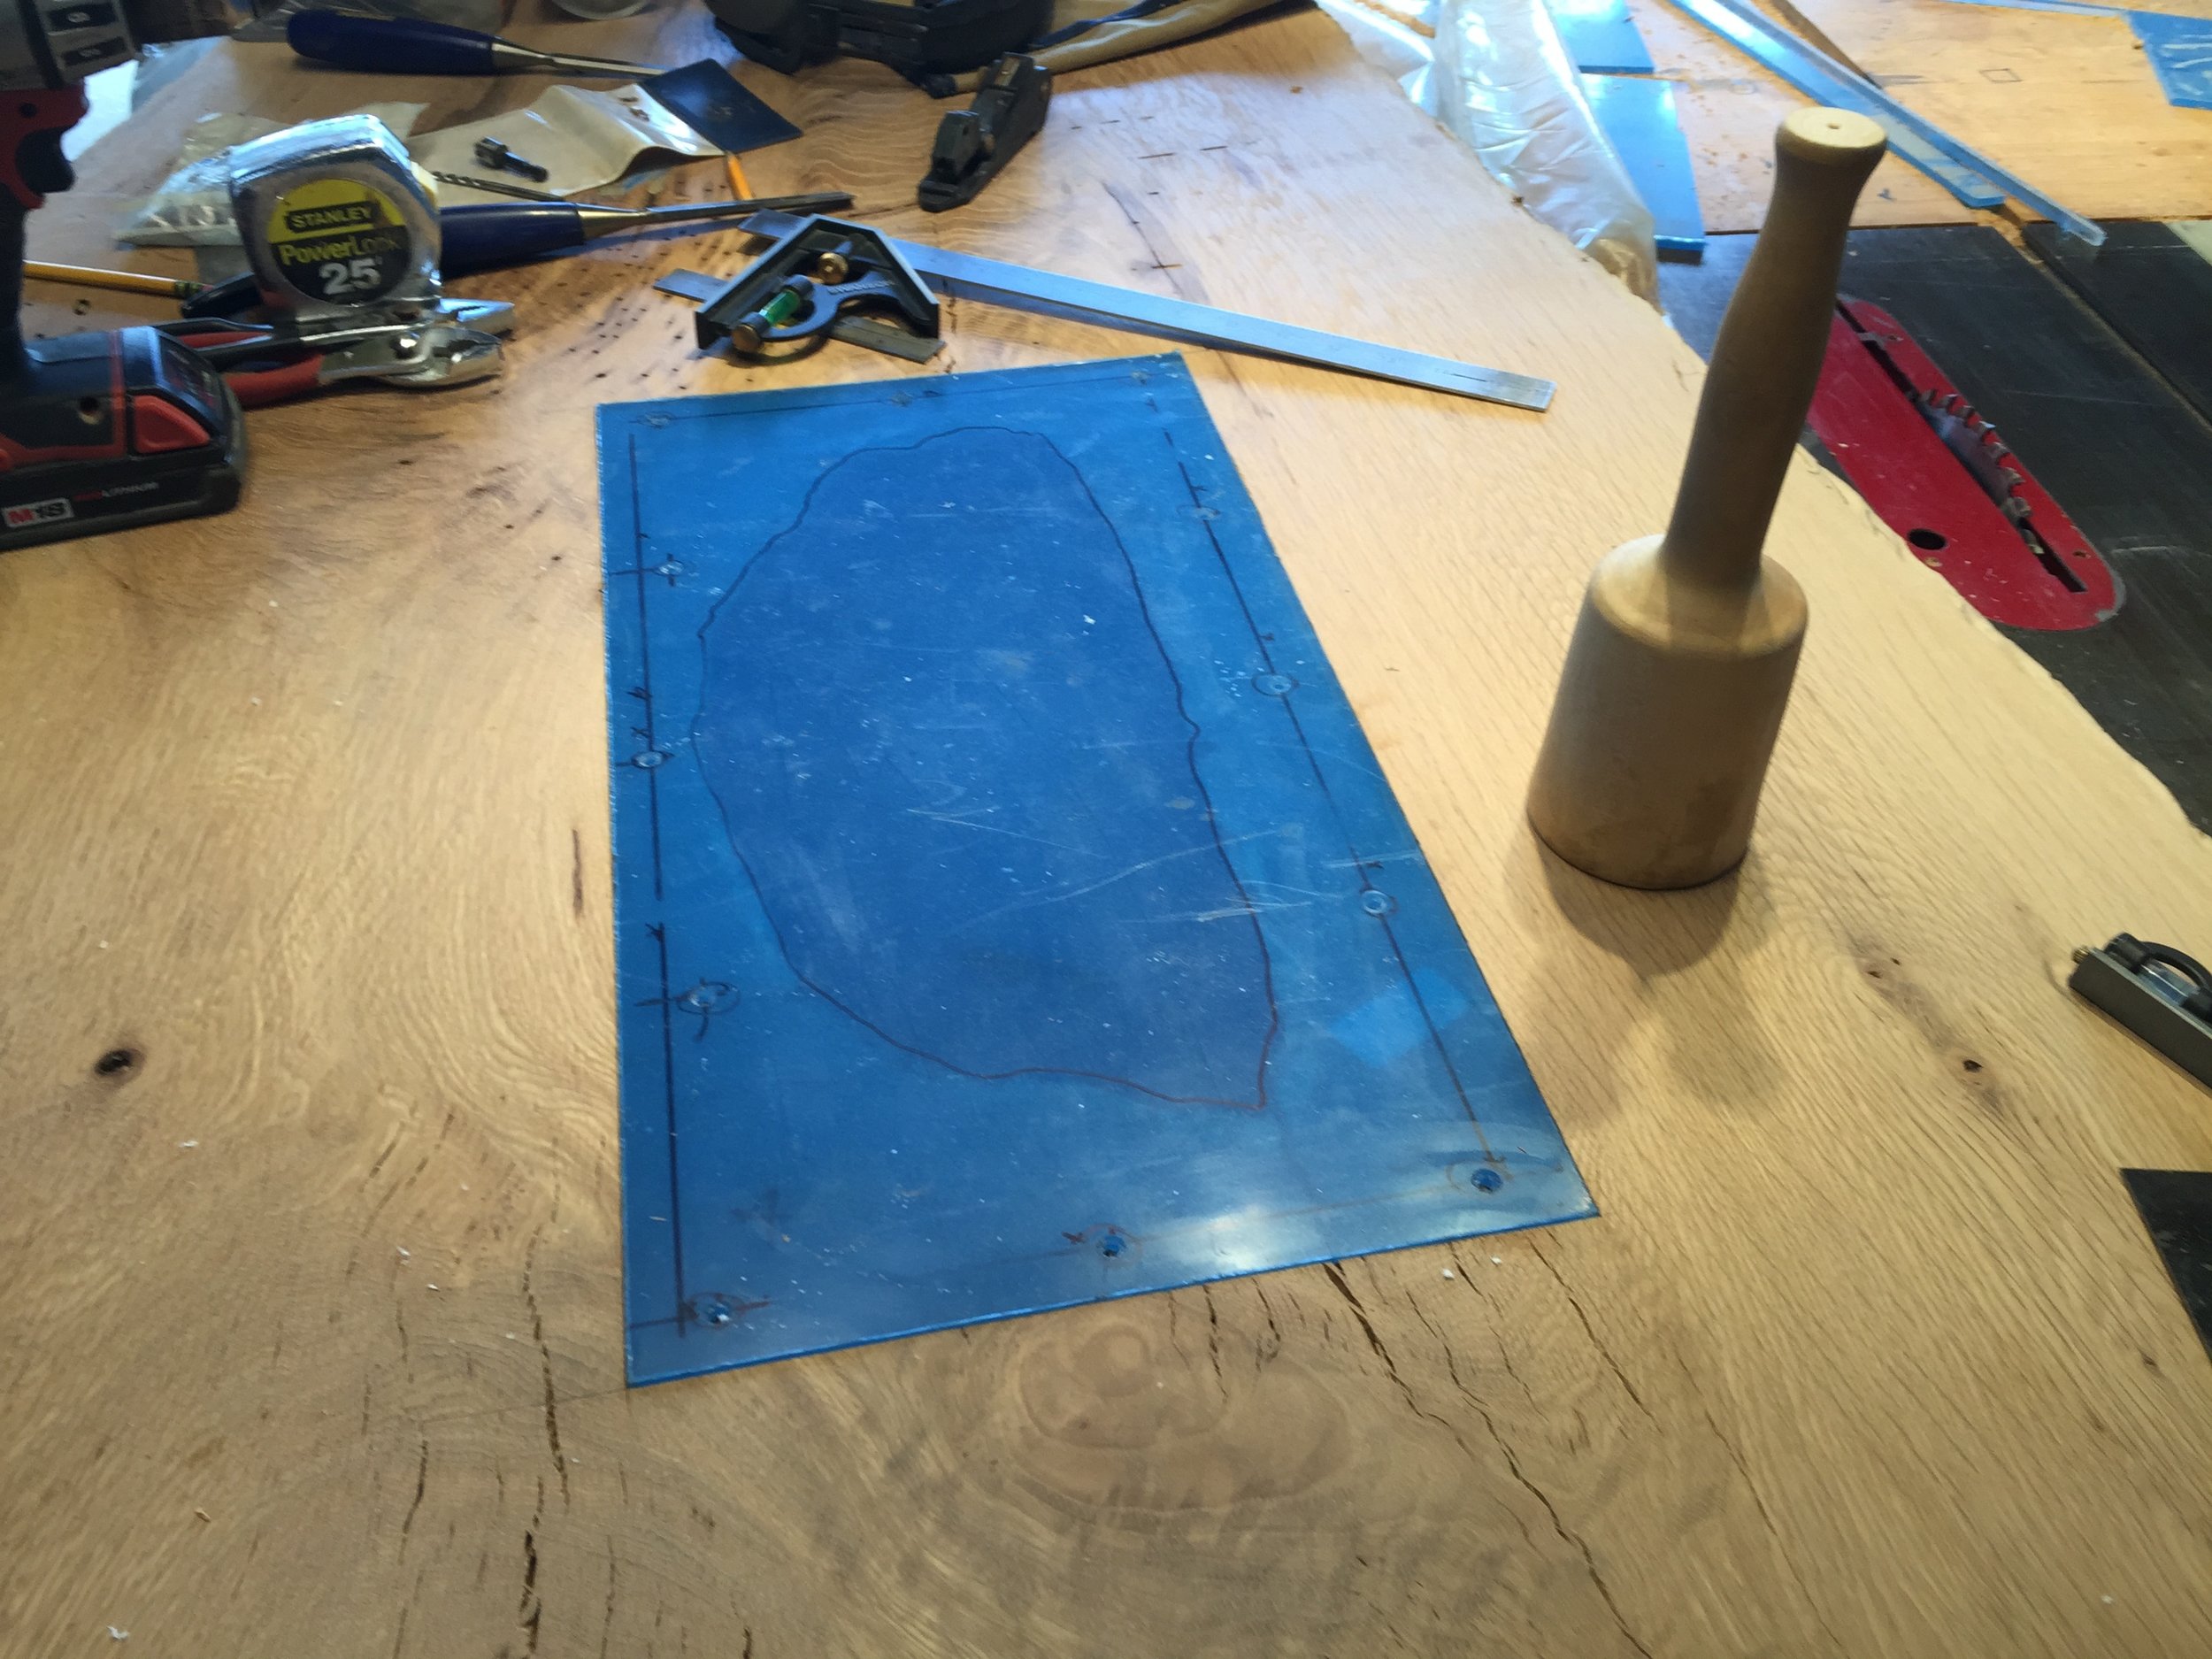  I inlaid a piece of plexiglass in the bottom of the slab under the central hole in order to fill it in. 